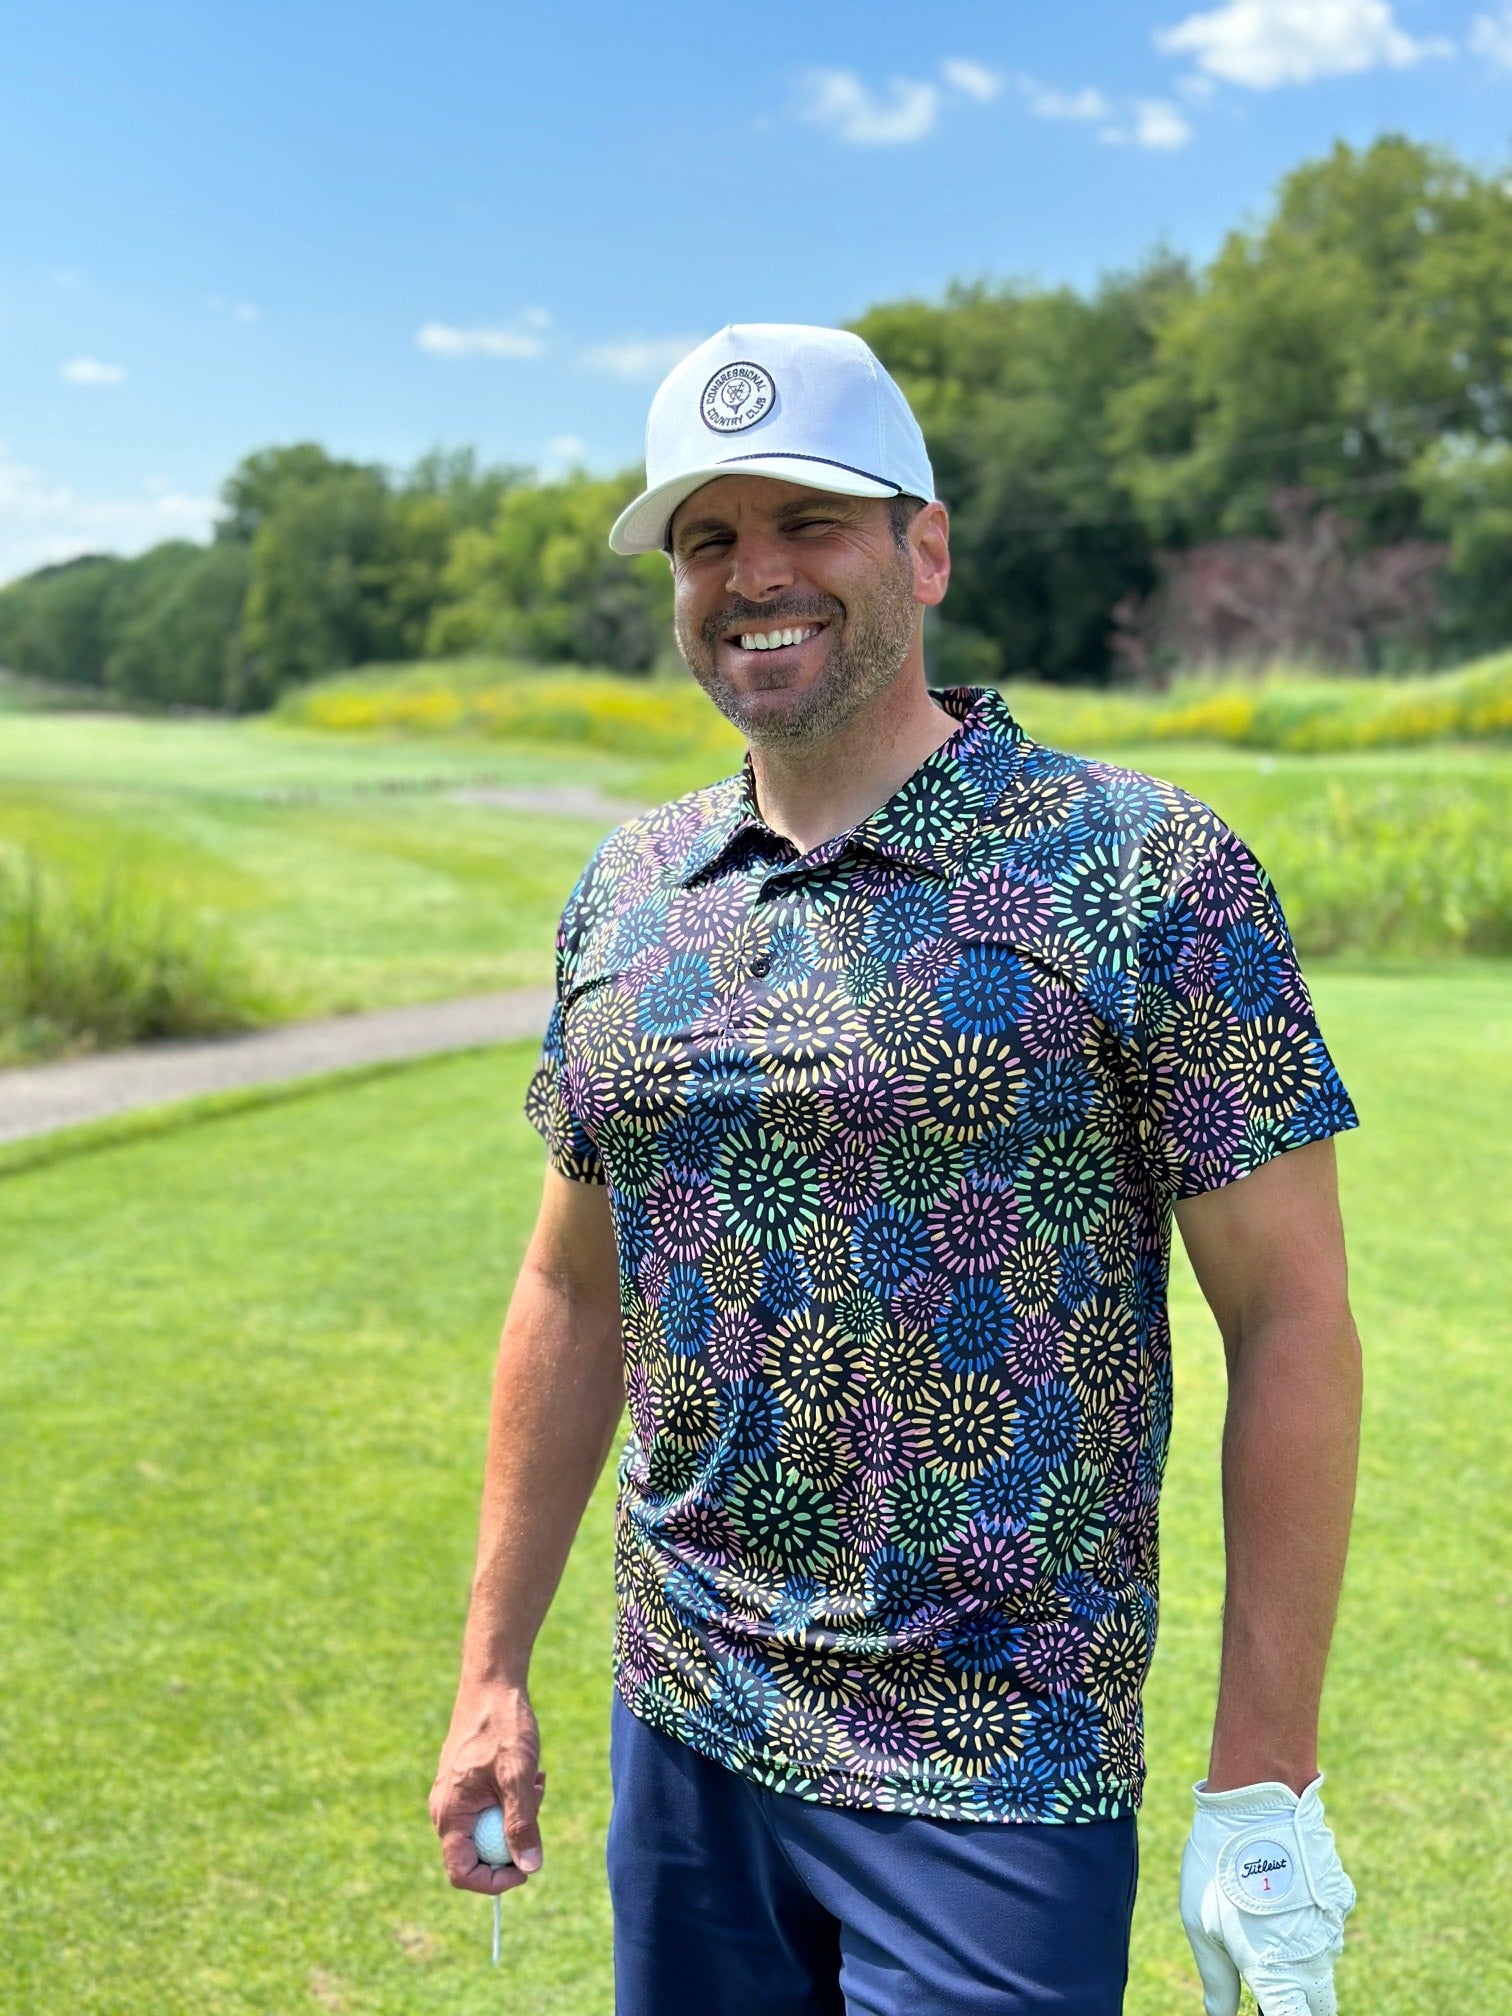 Independent Golf reviewer wearing the "dandelion drive" golf shirt by KEA Golf on the golf course